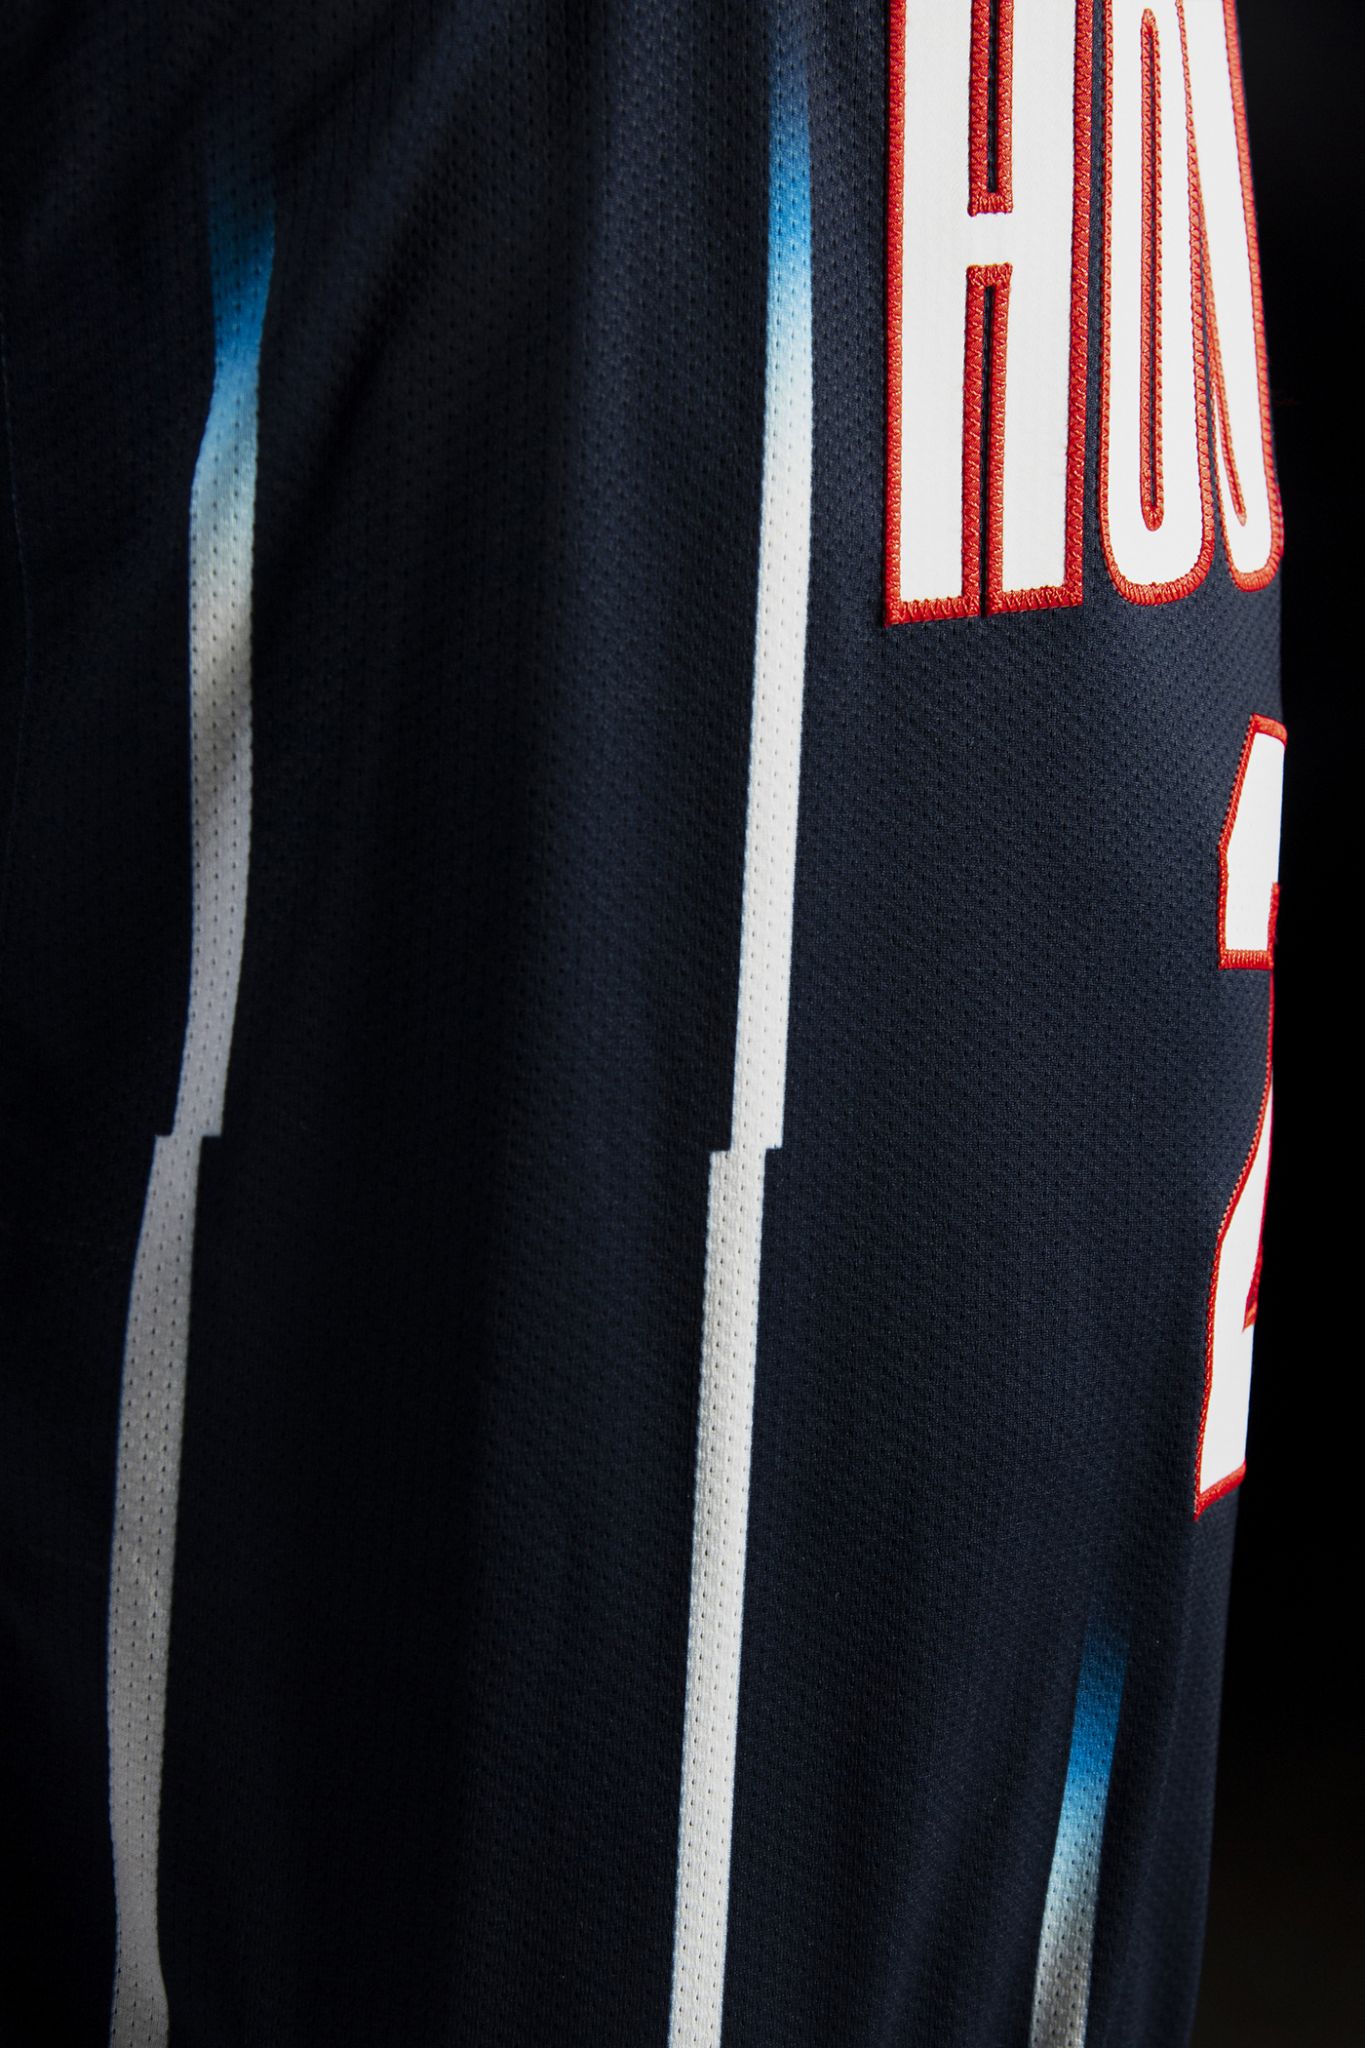 Rockets 'City' jerseys feature colors reminiscent of Houston Oilers